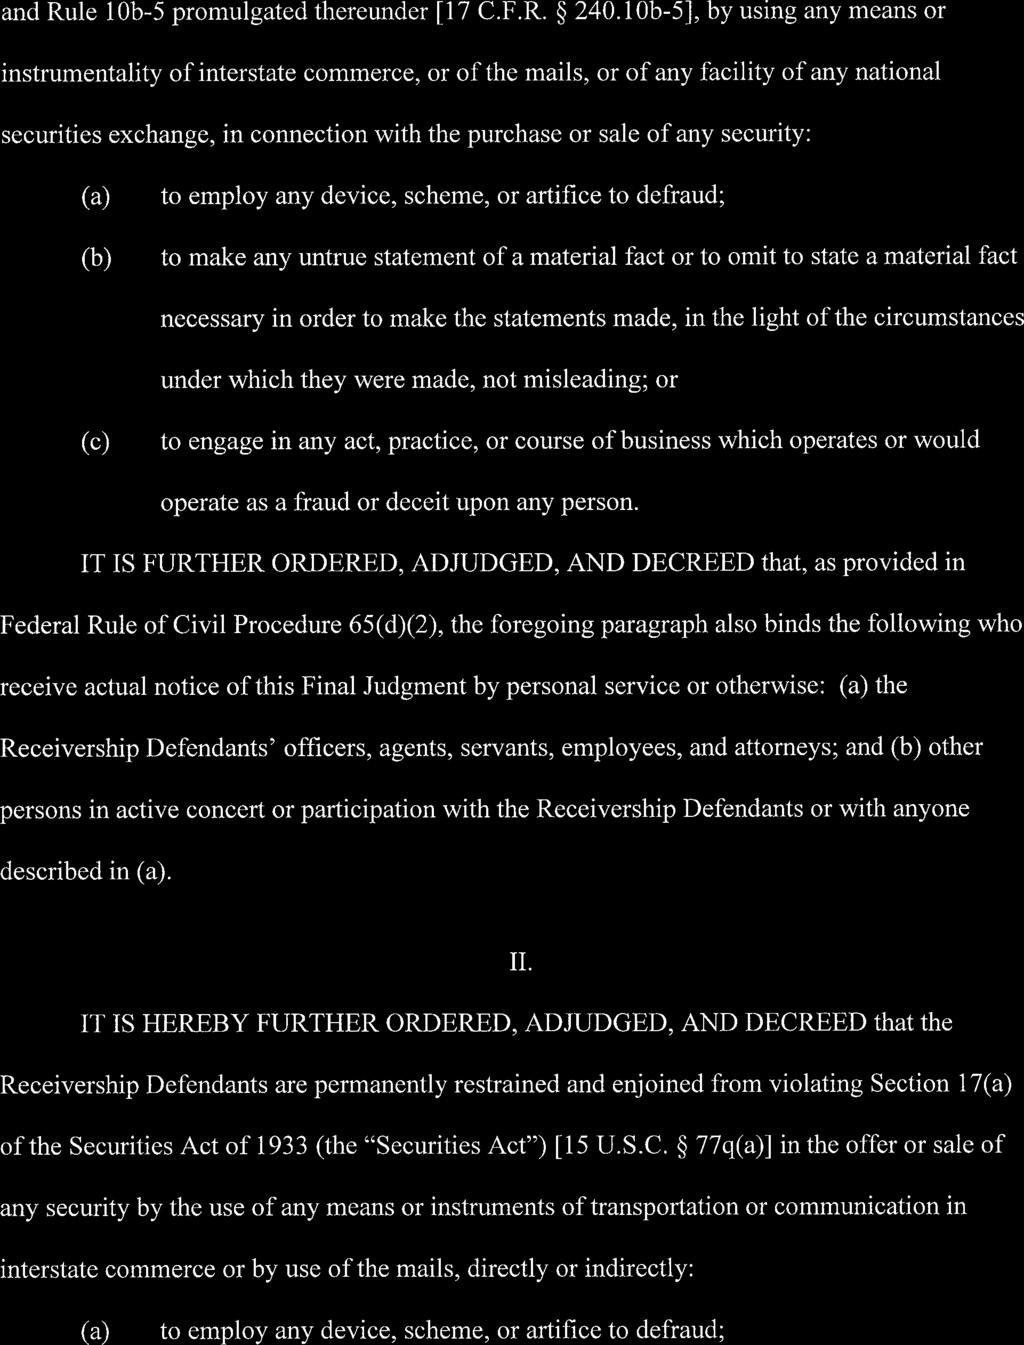 Case 1:14-cv-01002-CRC Document 238 Filed 03/08/19 Page 8 of 11 and Rule lob-5 promulgated thereunder [17 C.F.R. 240.